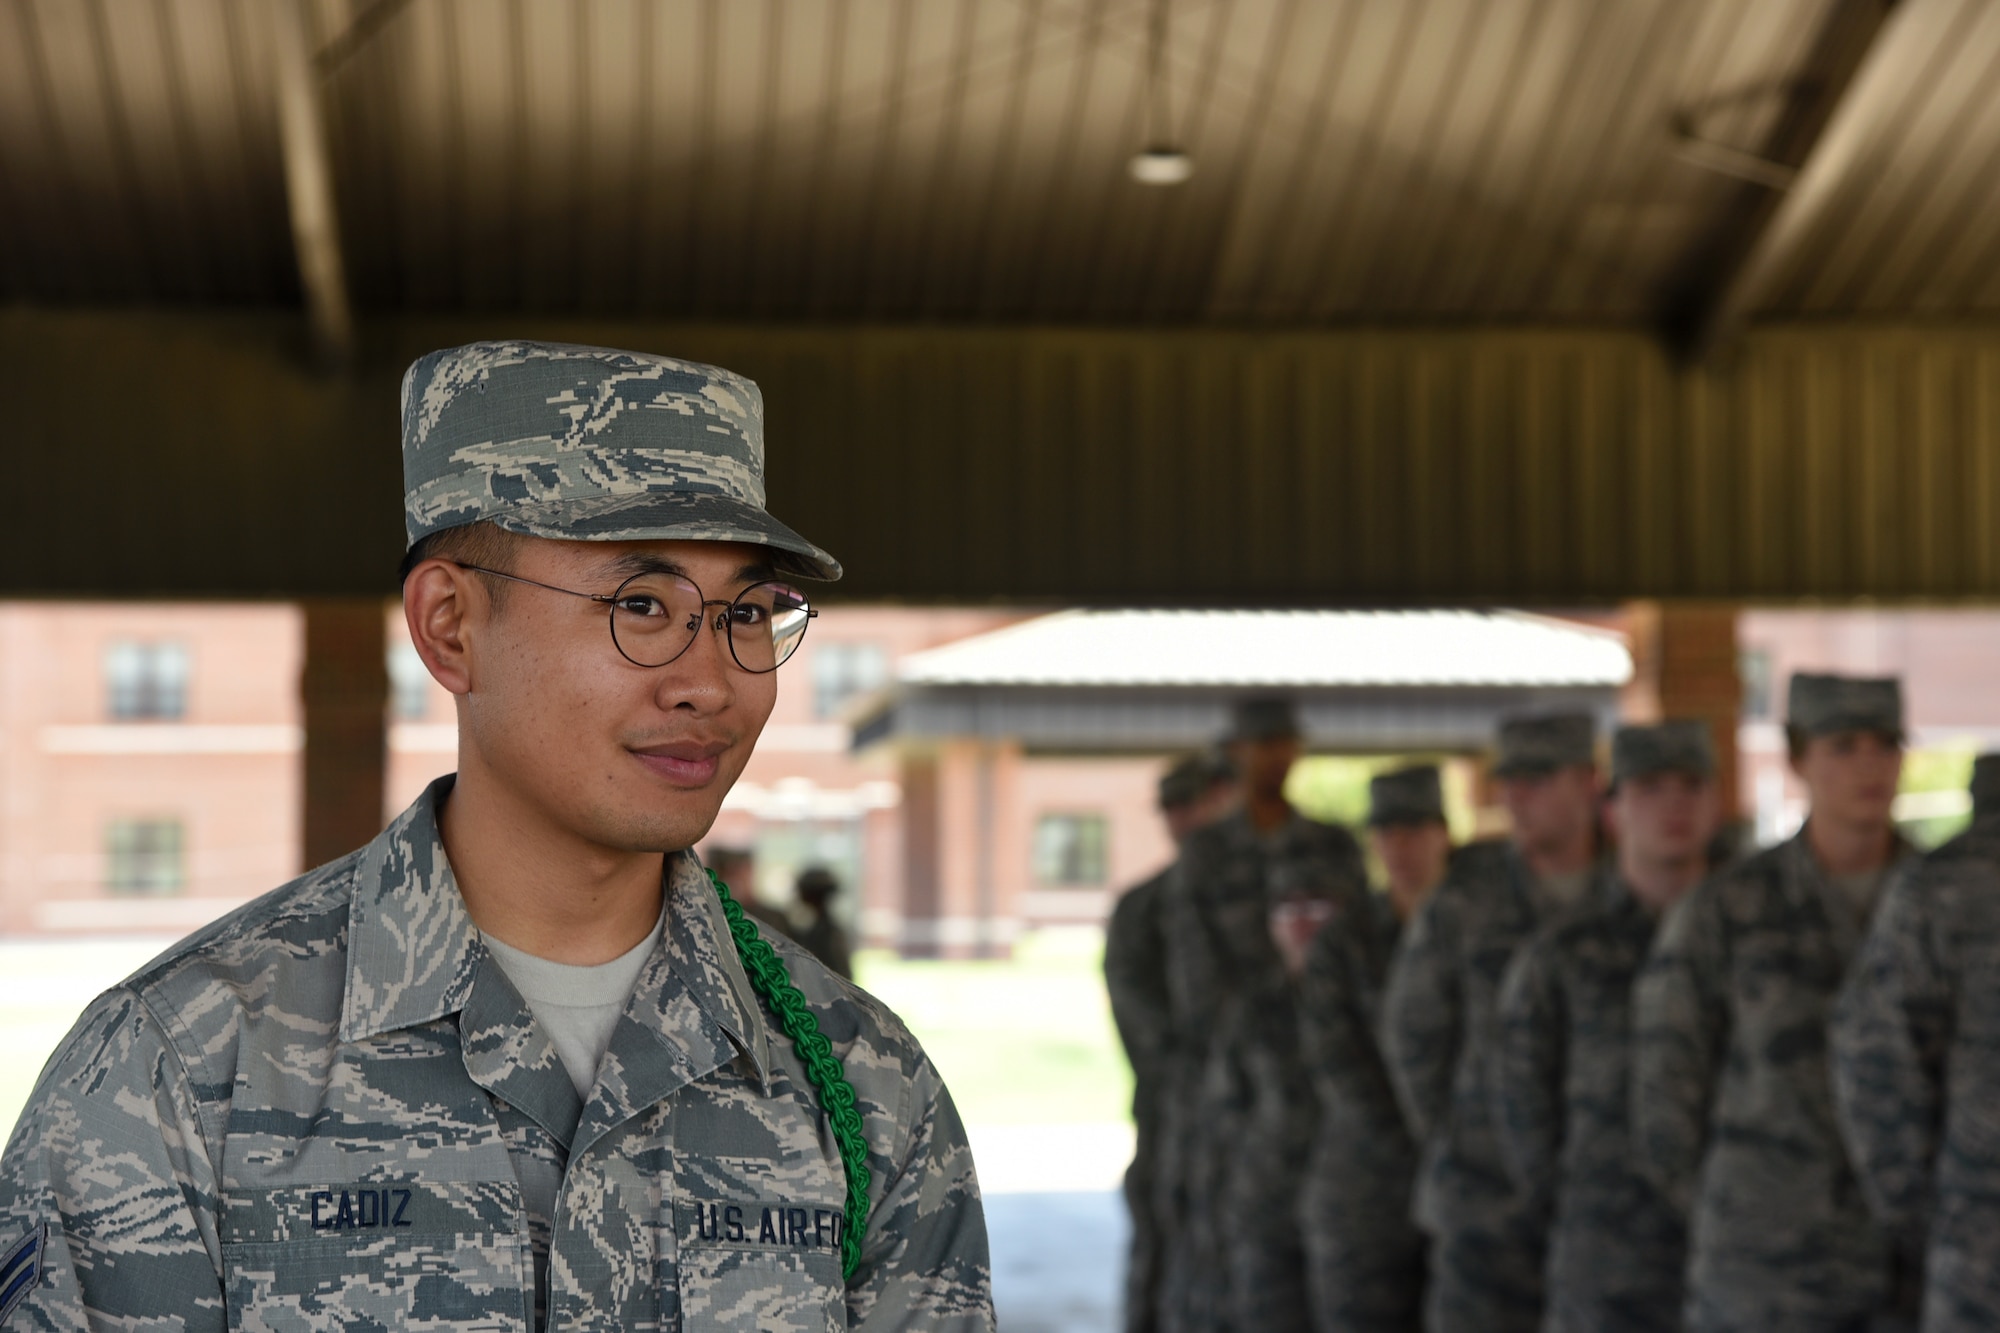 U.S. Air Force Airman 1st Class Richard Cadiz, 316th Training Squadron student and green rope level Airman Leader, prepares to size his flight during an open rank inspection outside the 316th TRS  on Goodfellow Air Force Base, Texas, May 14, 2019. Open ranks are conducted by Airman Leaders, who are peers but distinguished by wearing either a red, yellow or green rope around his or her left shoulder. (U.S. Air Force photo by Airman 1st Class Abbey Rieves/Released)